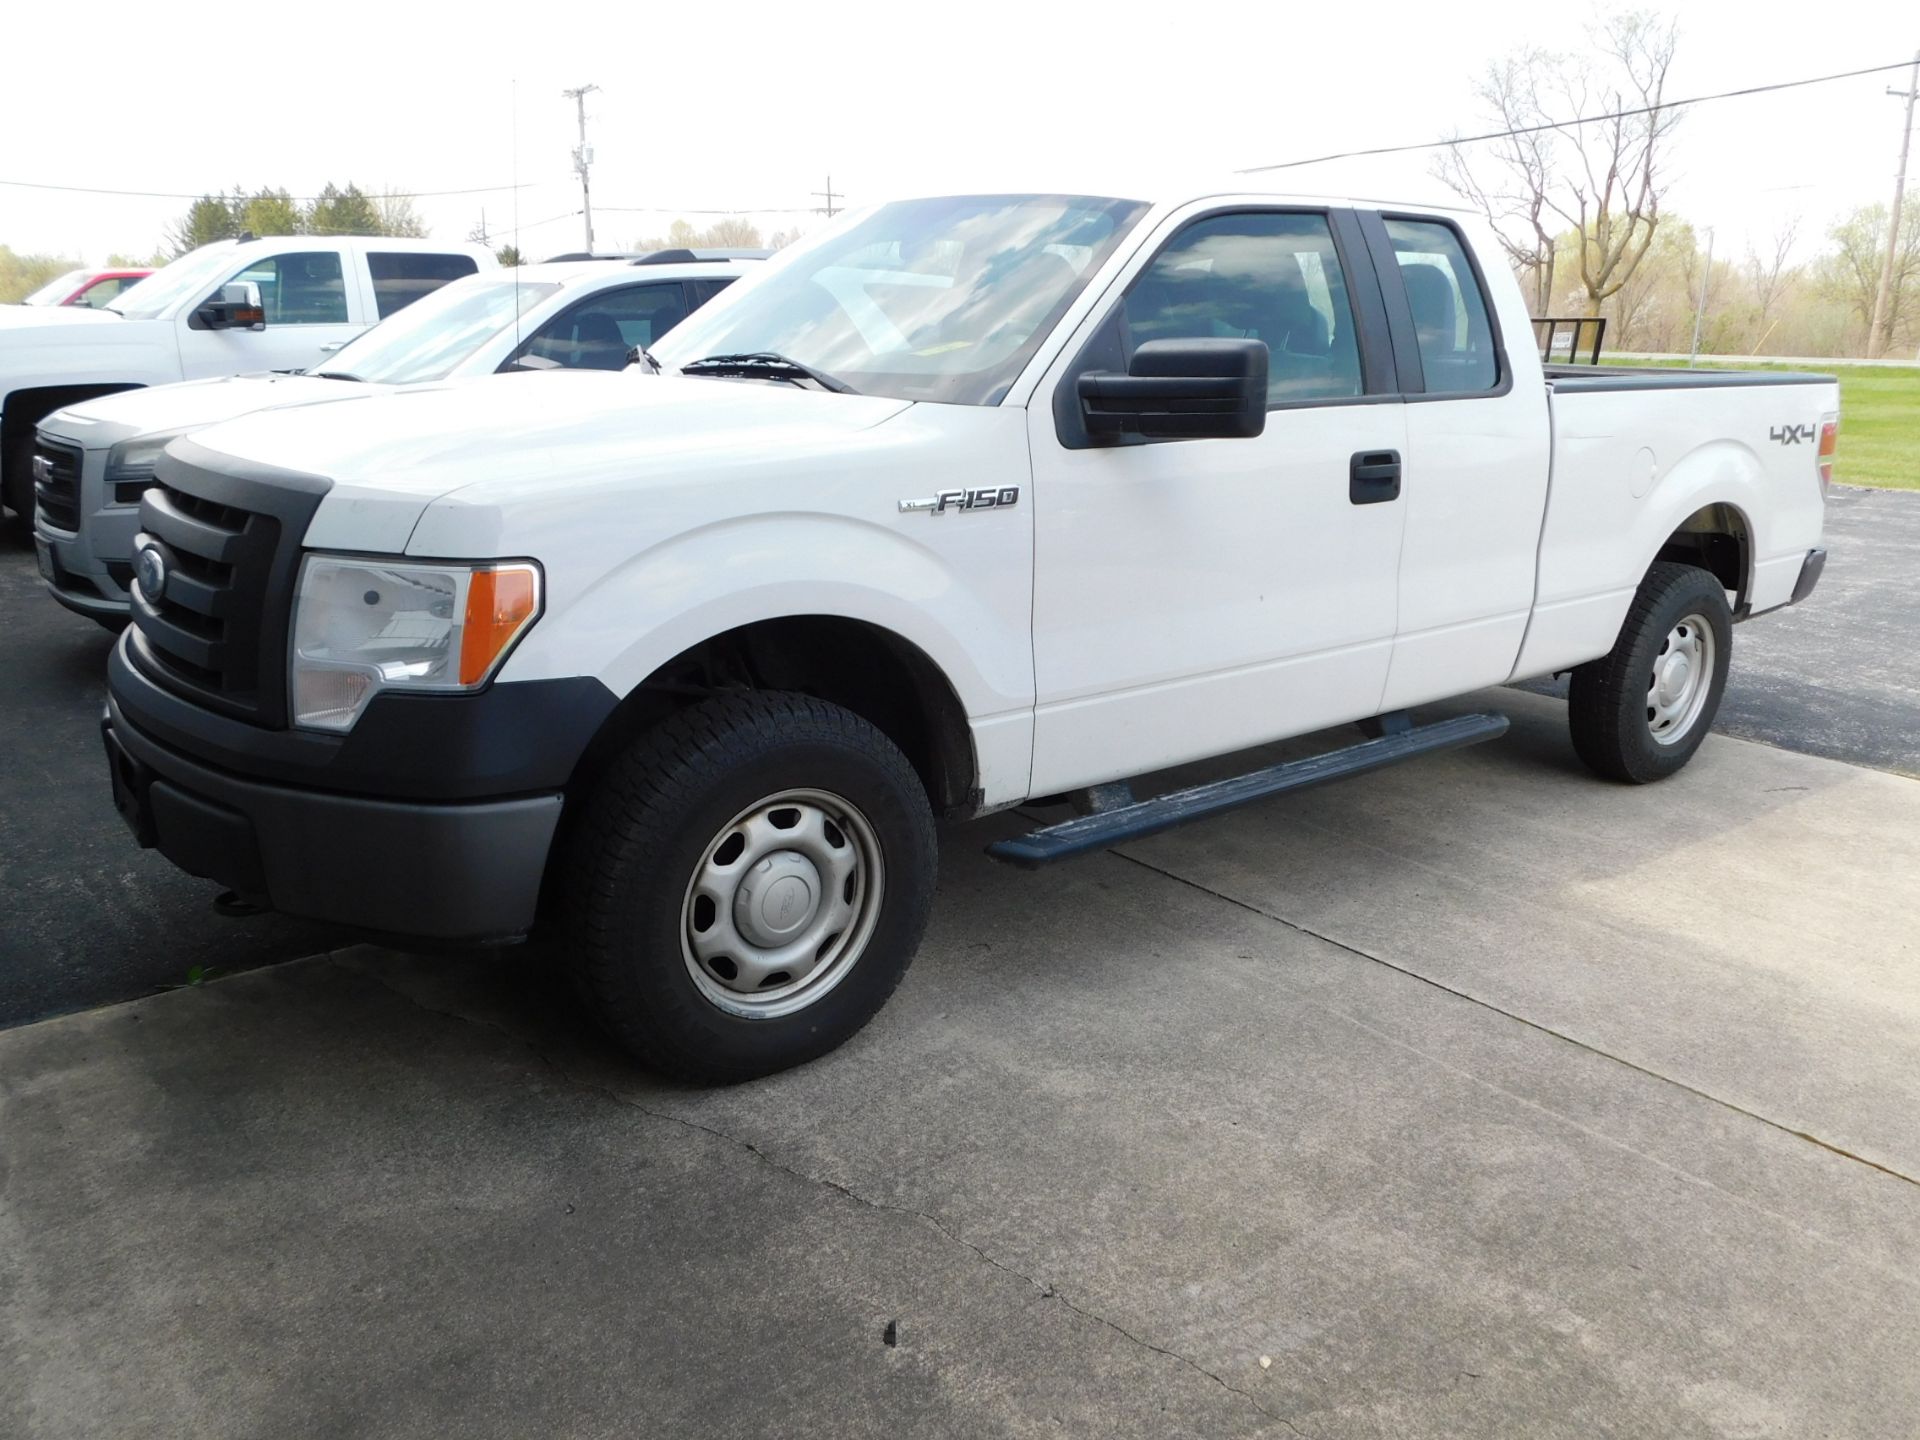 2012 Ford F-150XL Pickup VIN 1FTEX1EM1CFB57282, 4WD, Extended Cab, Automatic, AC< PW